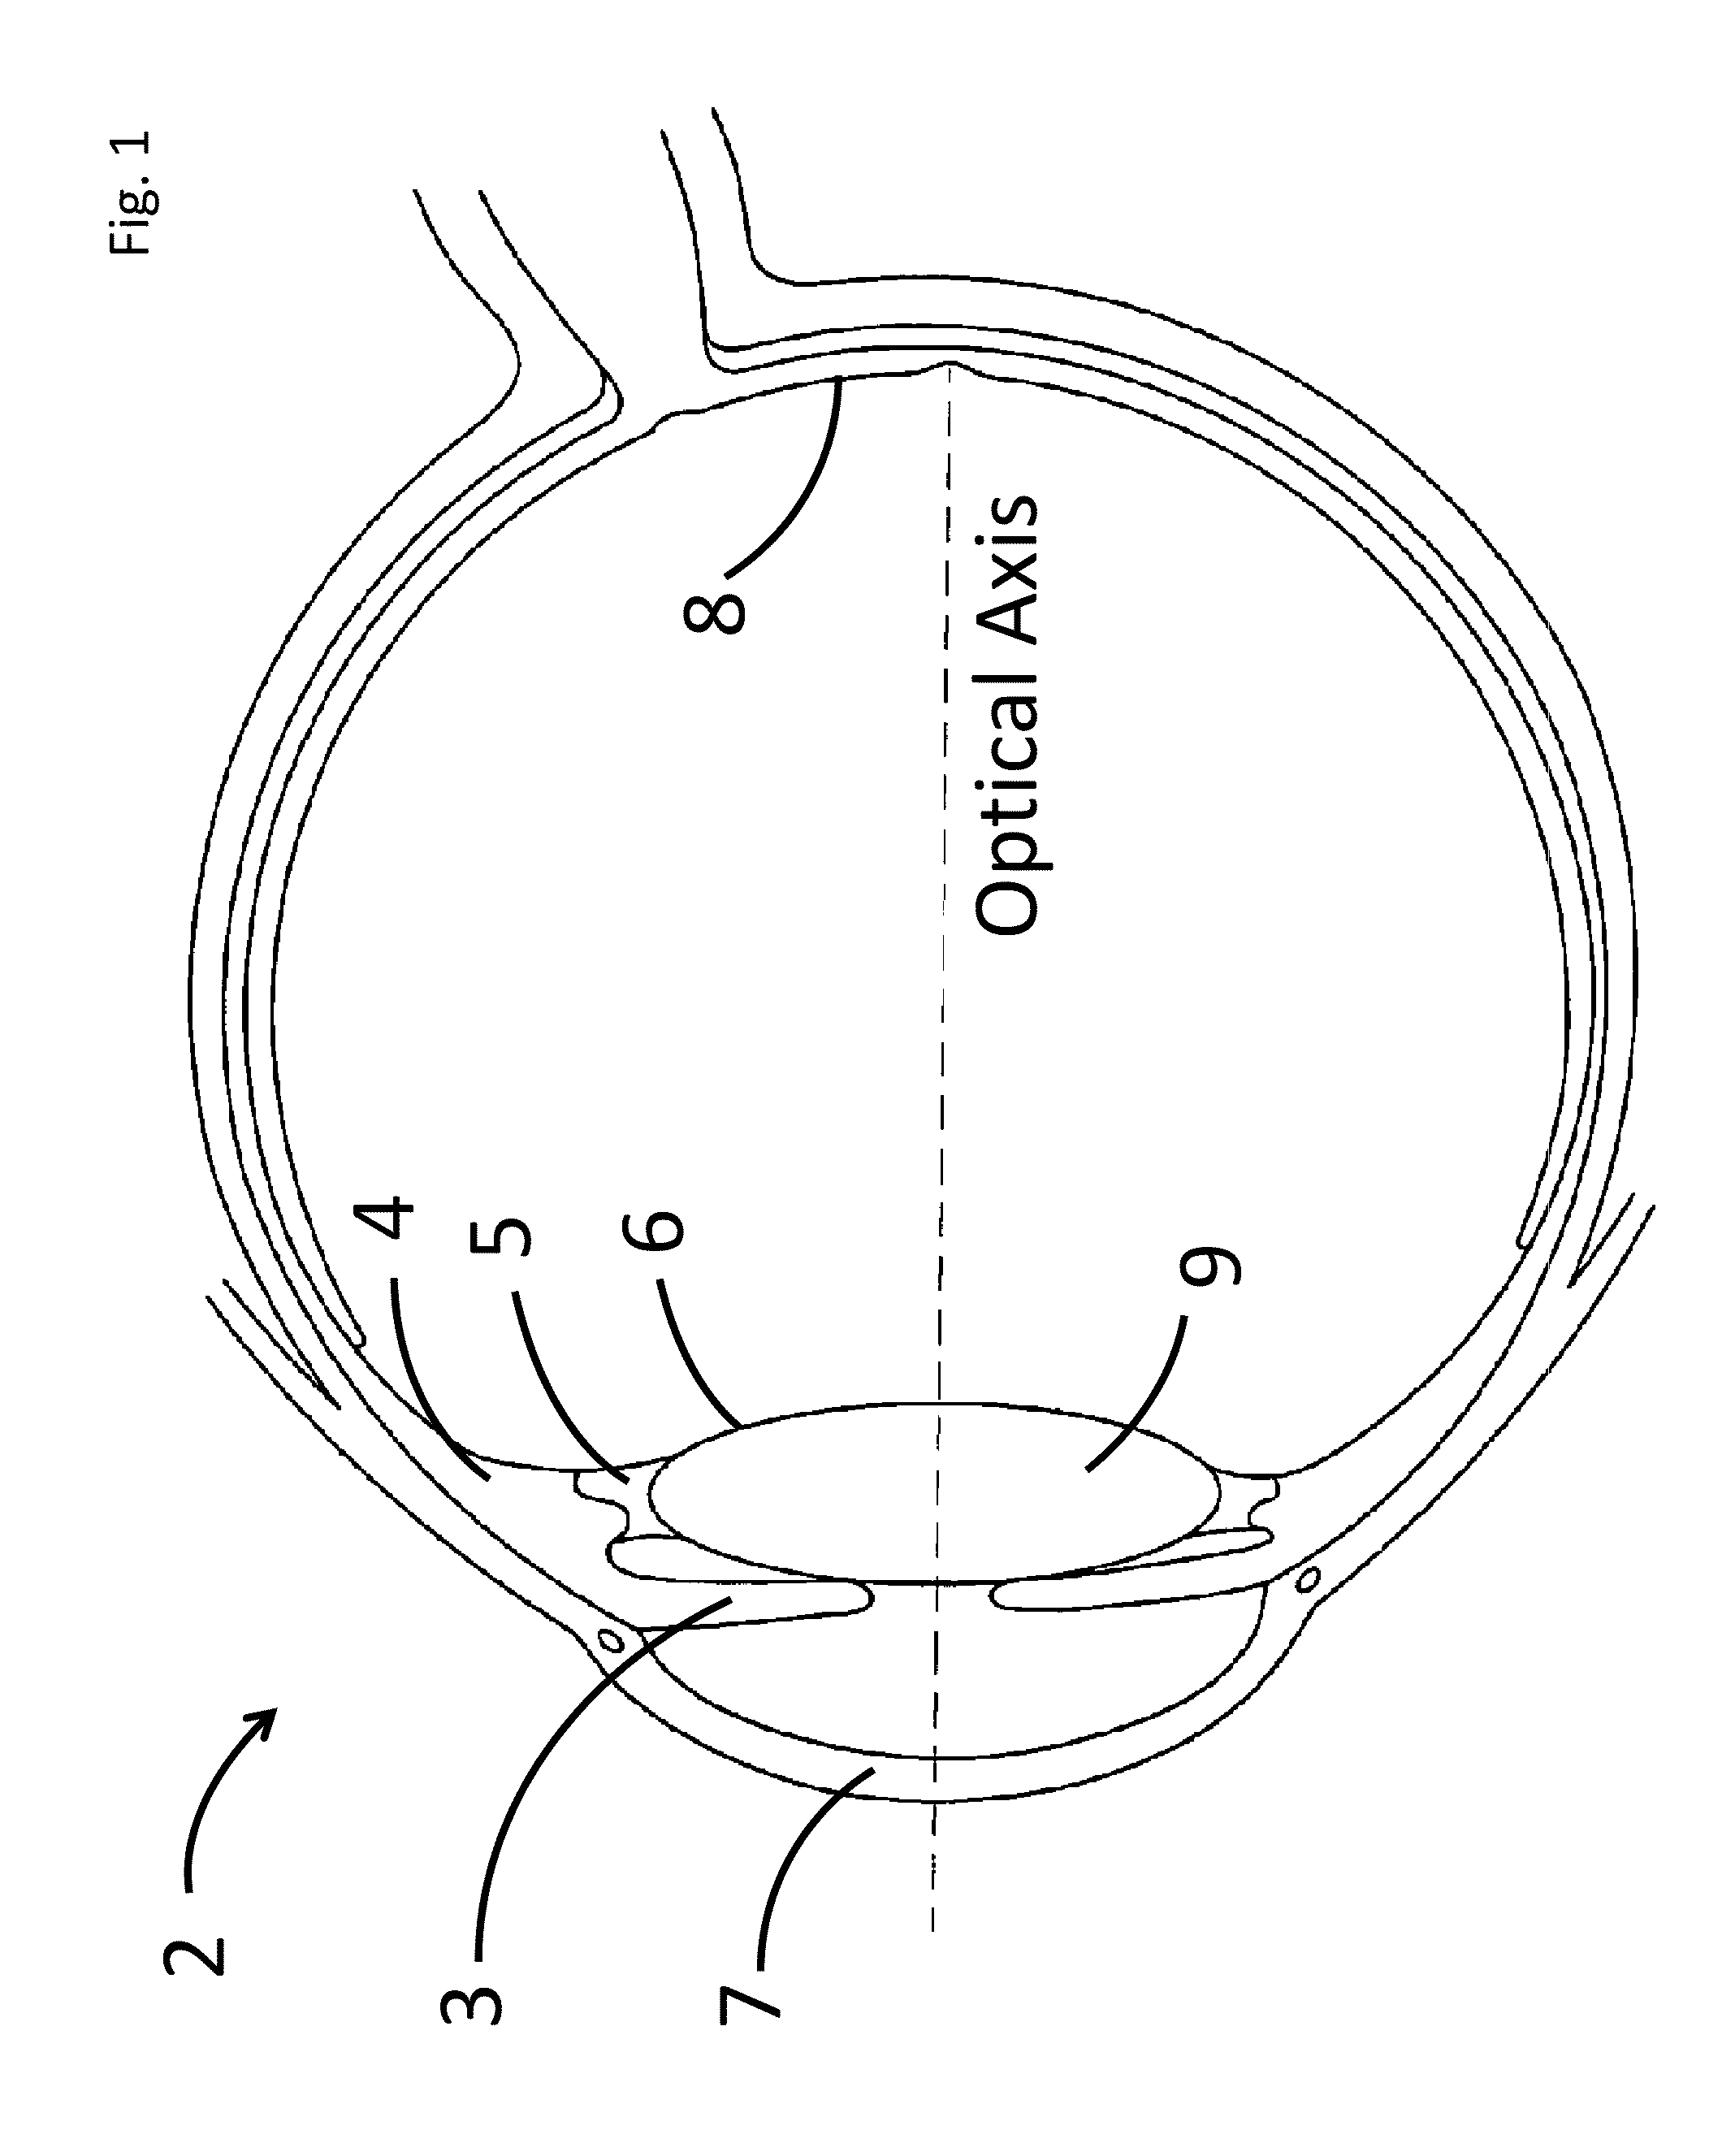 Fluidic intraocular lens systems and methods